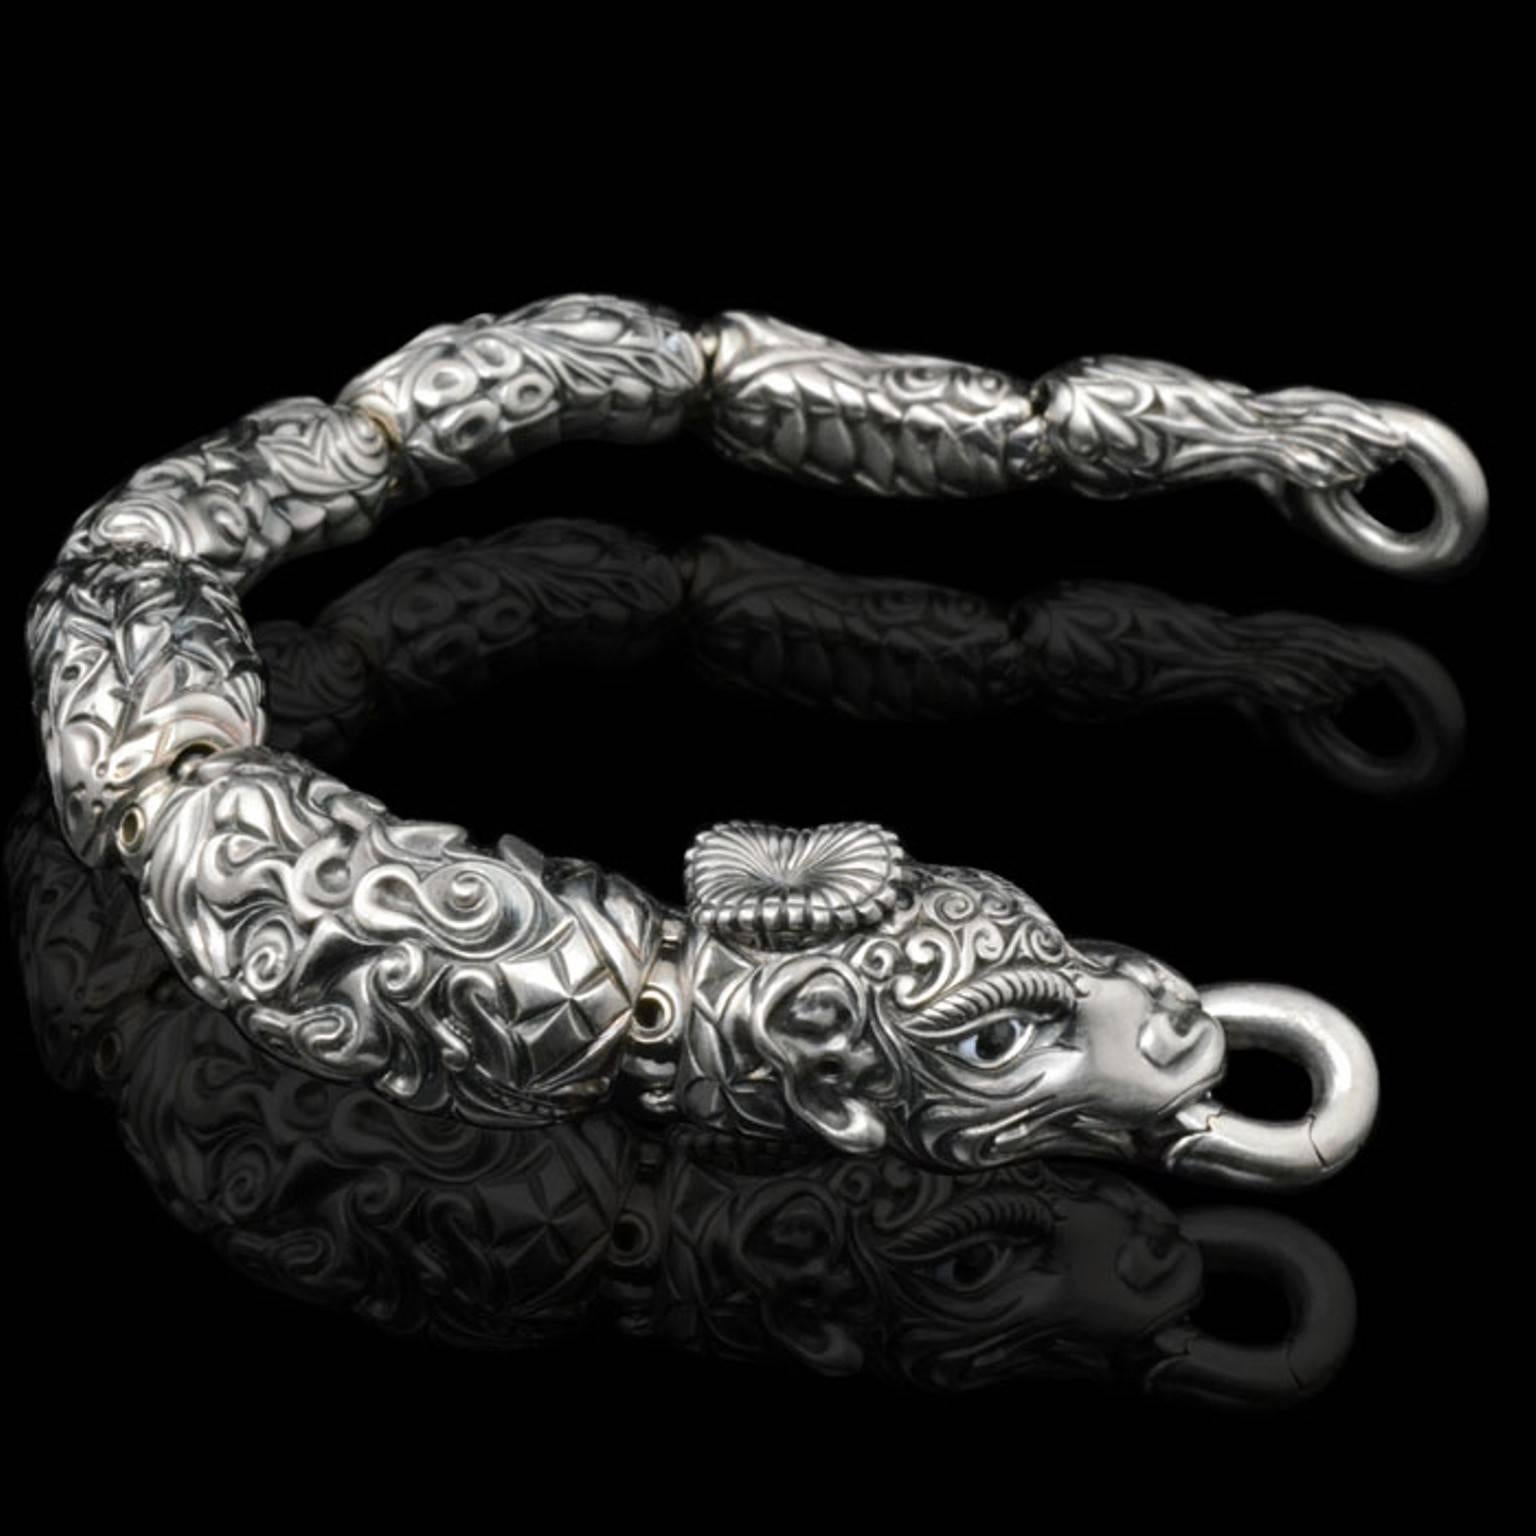 White gold bracelet designed as a dragon, with oxidized highlights and enamel eyes & teeth, Otto Jakob, 2012

18ct white gold - 1 of 6 made

132.50 grams

19cms/ 7.5